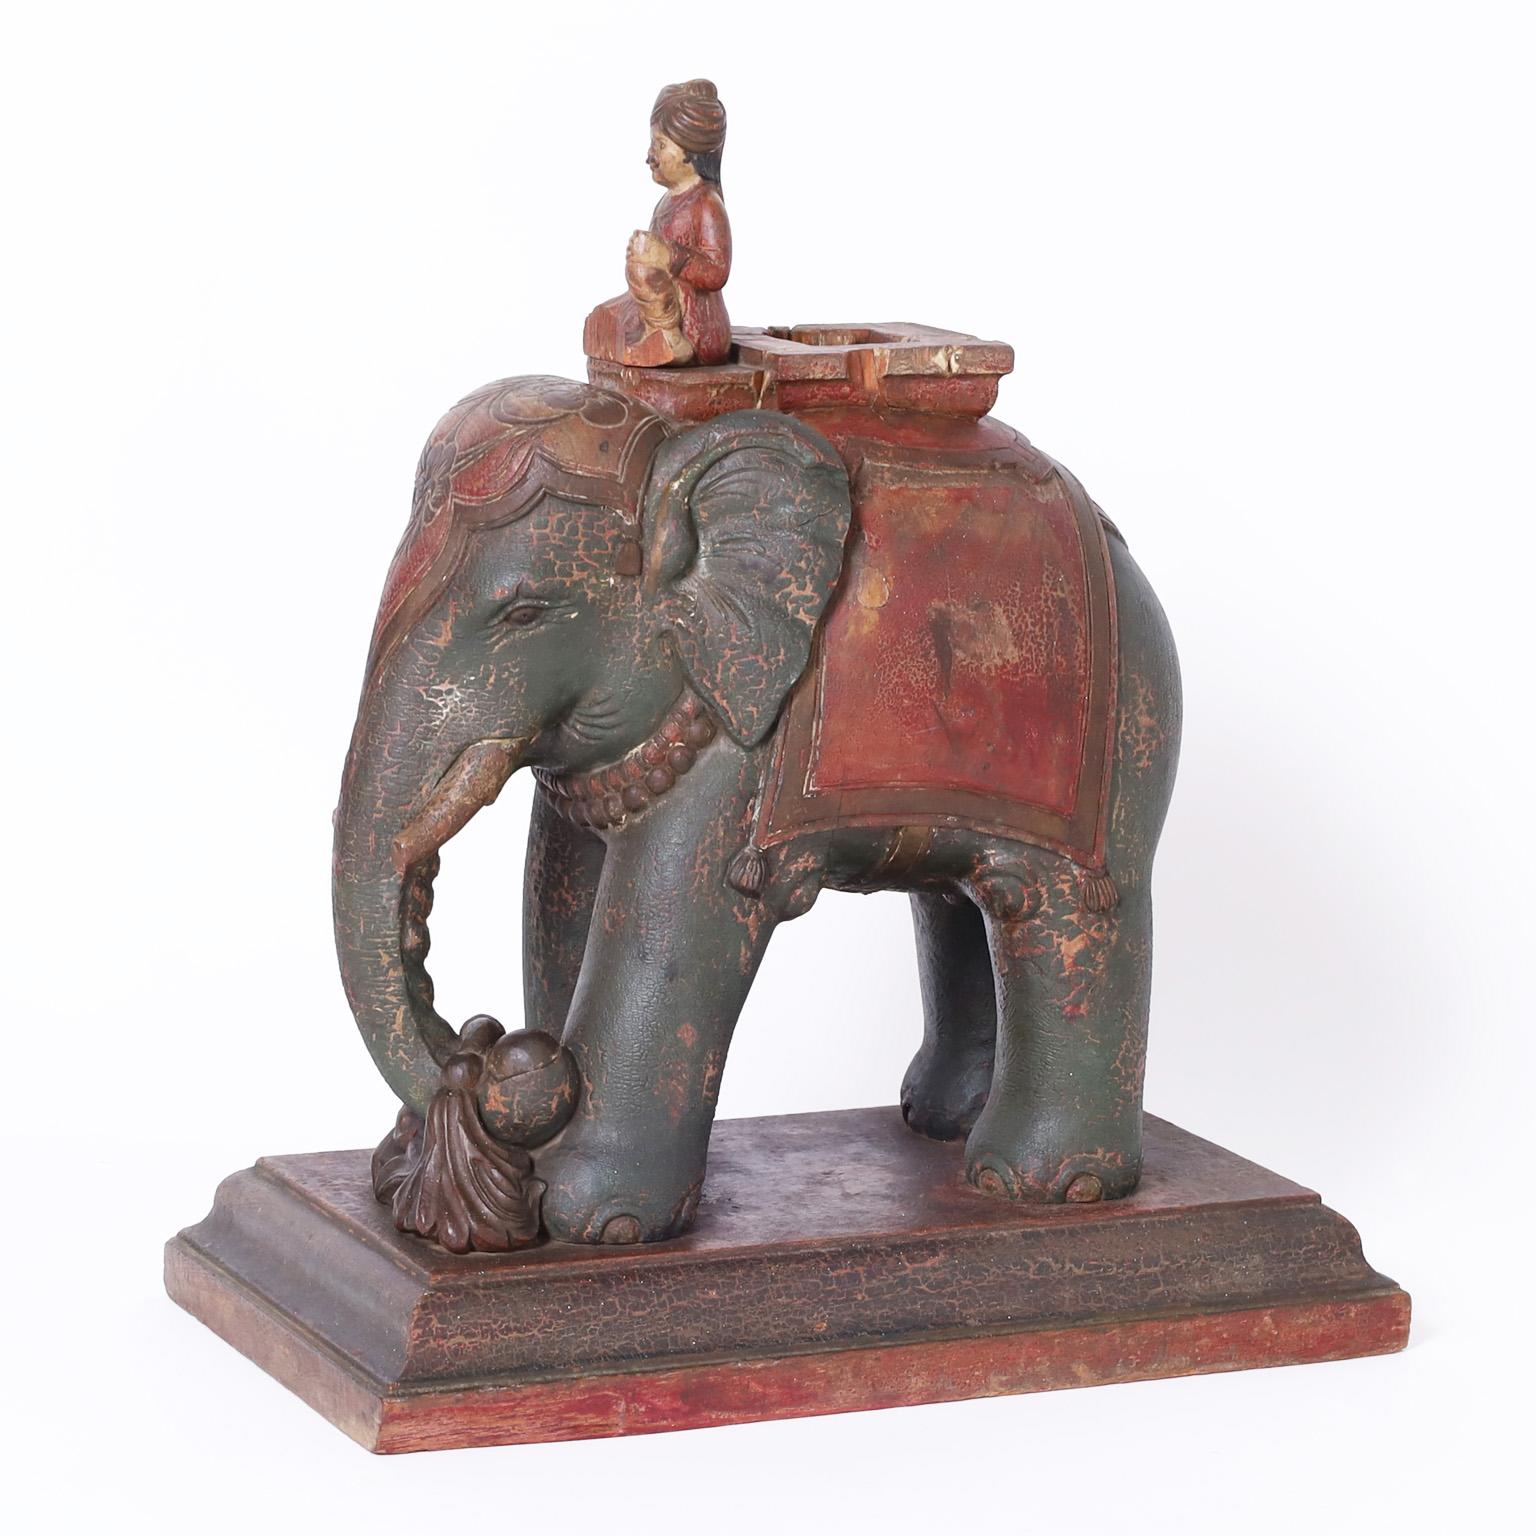 Intriguing 19th century Anglo Indian elephant and rider with a serene ambiance, having a polychrome finish now aged to perfection. Presented on a classic beveled plinth.